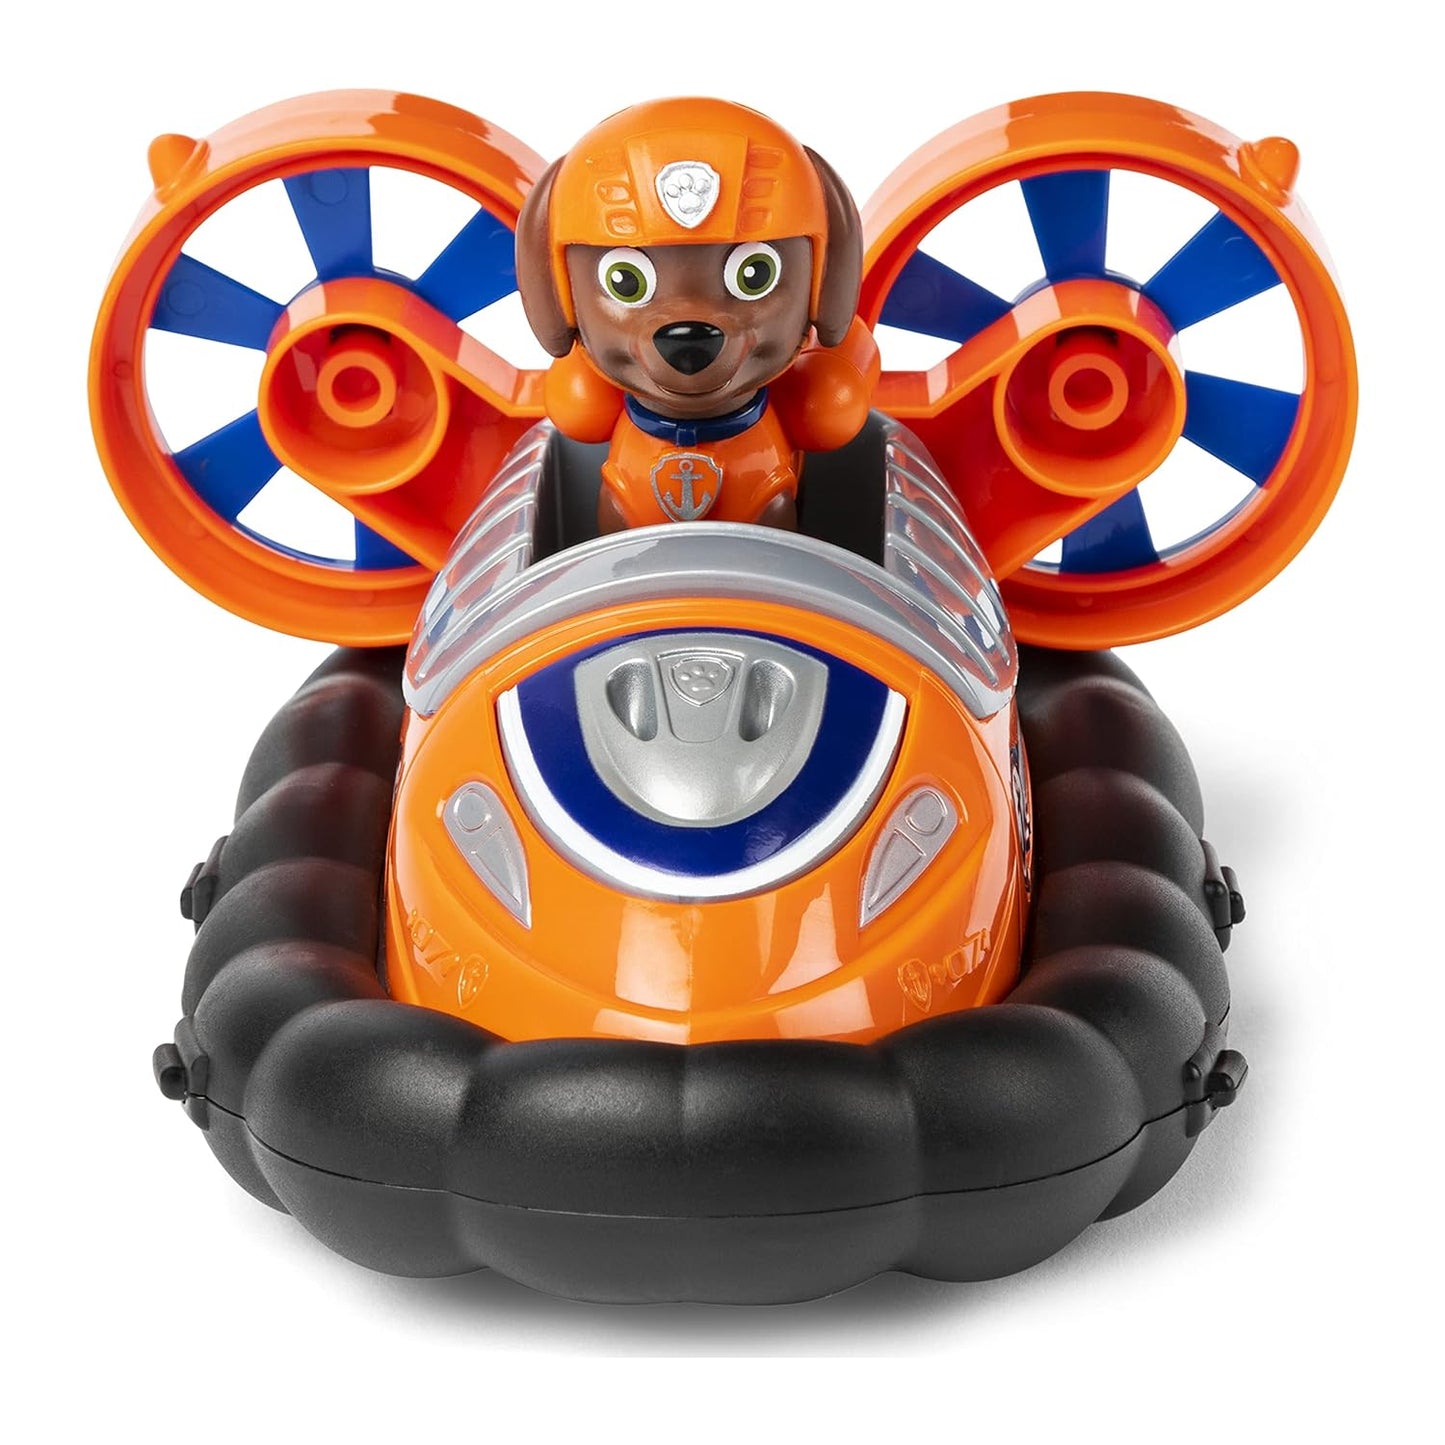 Paw Patrol  Zuma Hovercraft Vehicle with Collectible Figure